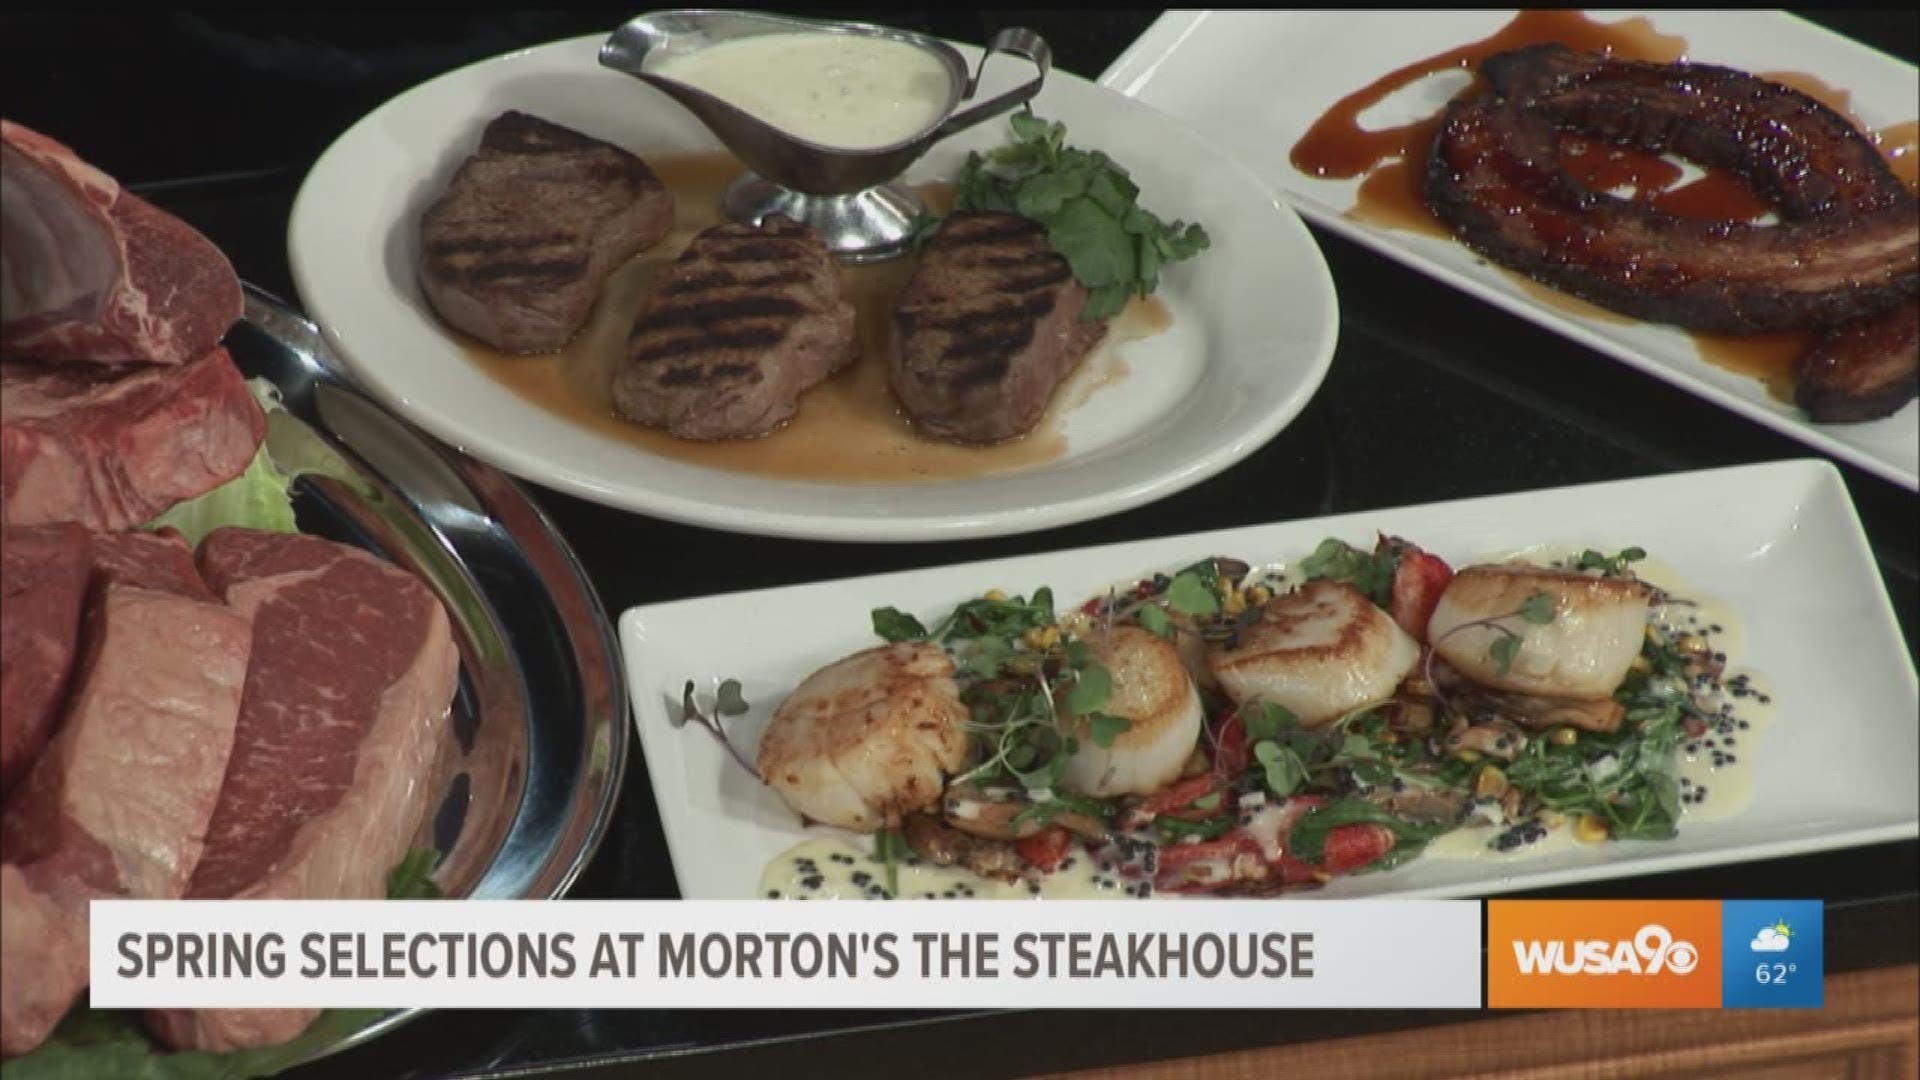 Chef Bob Kiebler of Morton's The Steakhouse in Bethesda, MD whips up a delicious spring dish using fresh and flavorful seafood.